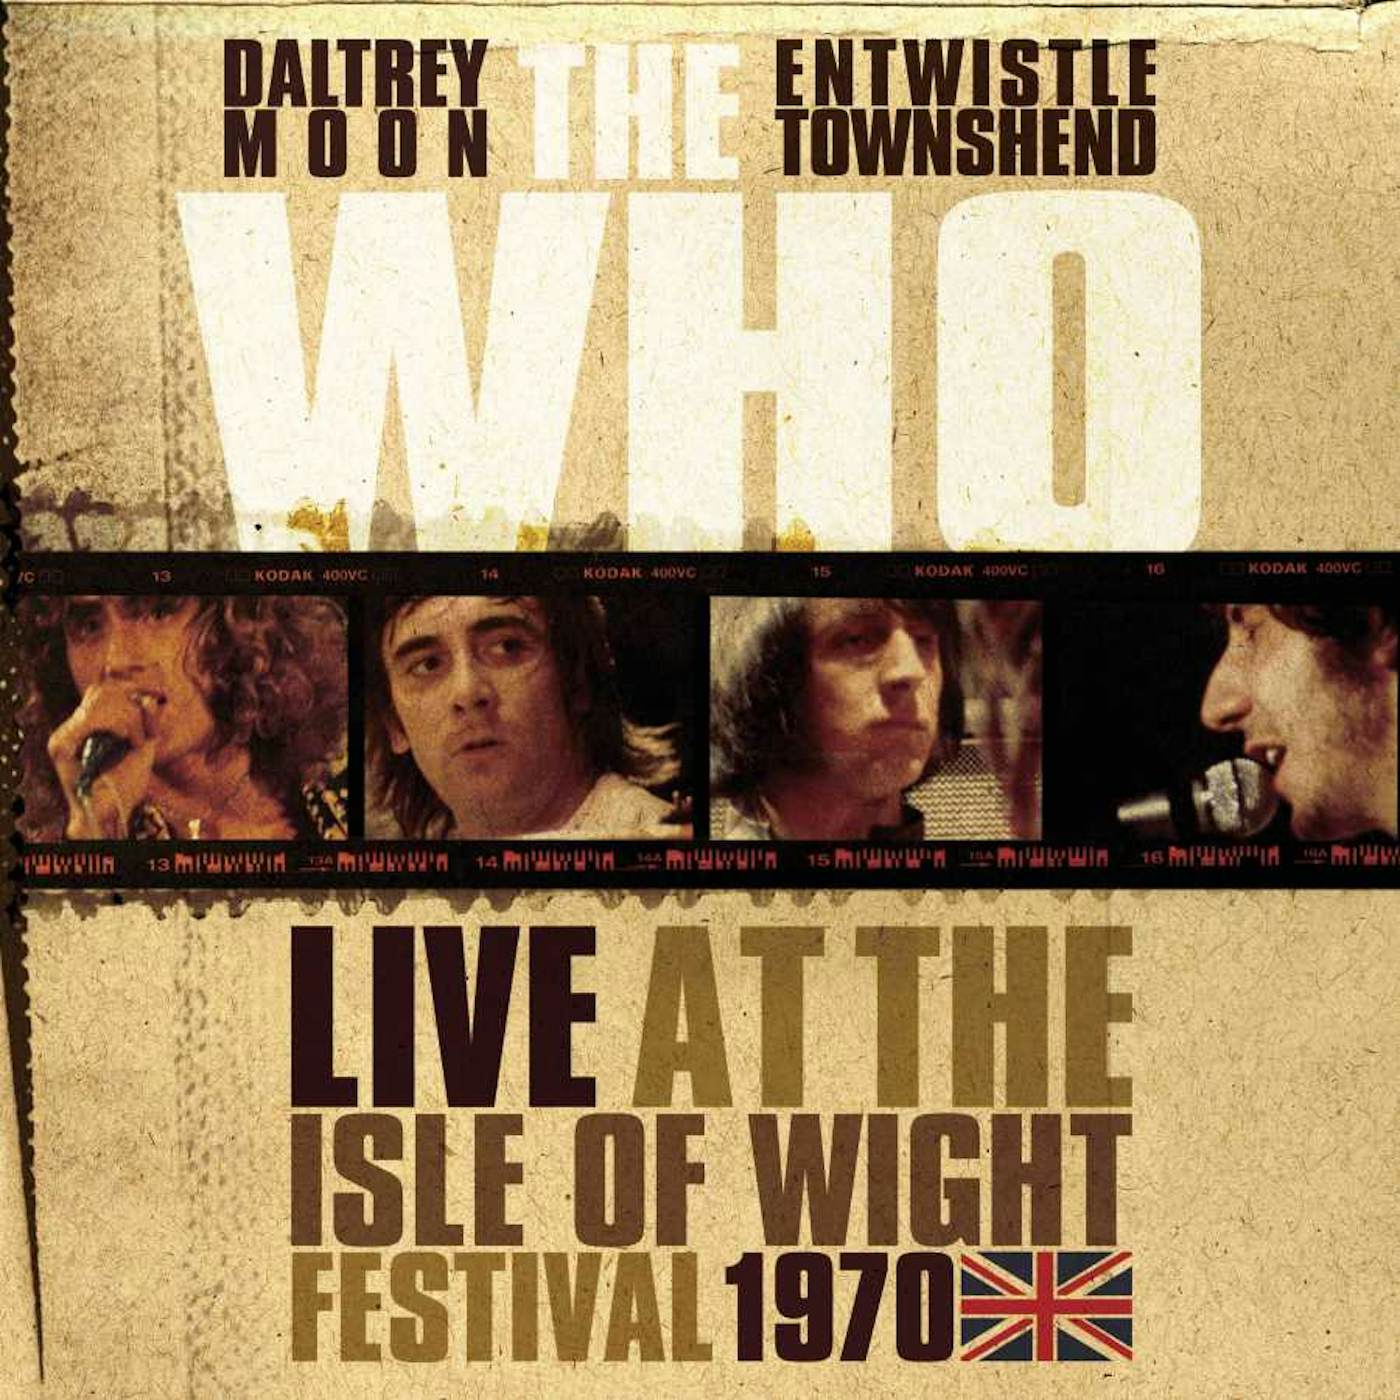 The Who Live At The Isle Of Wight Festival 1970 (Box Set) Vinyl Record